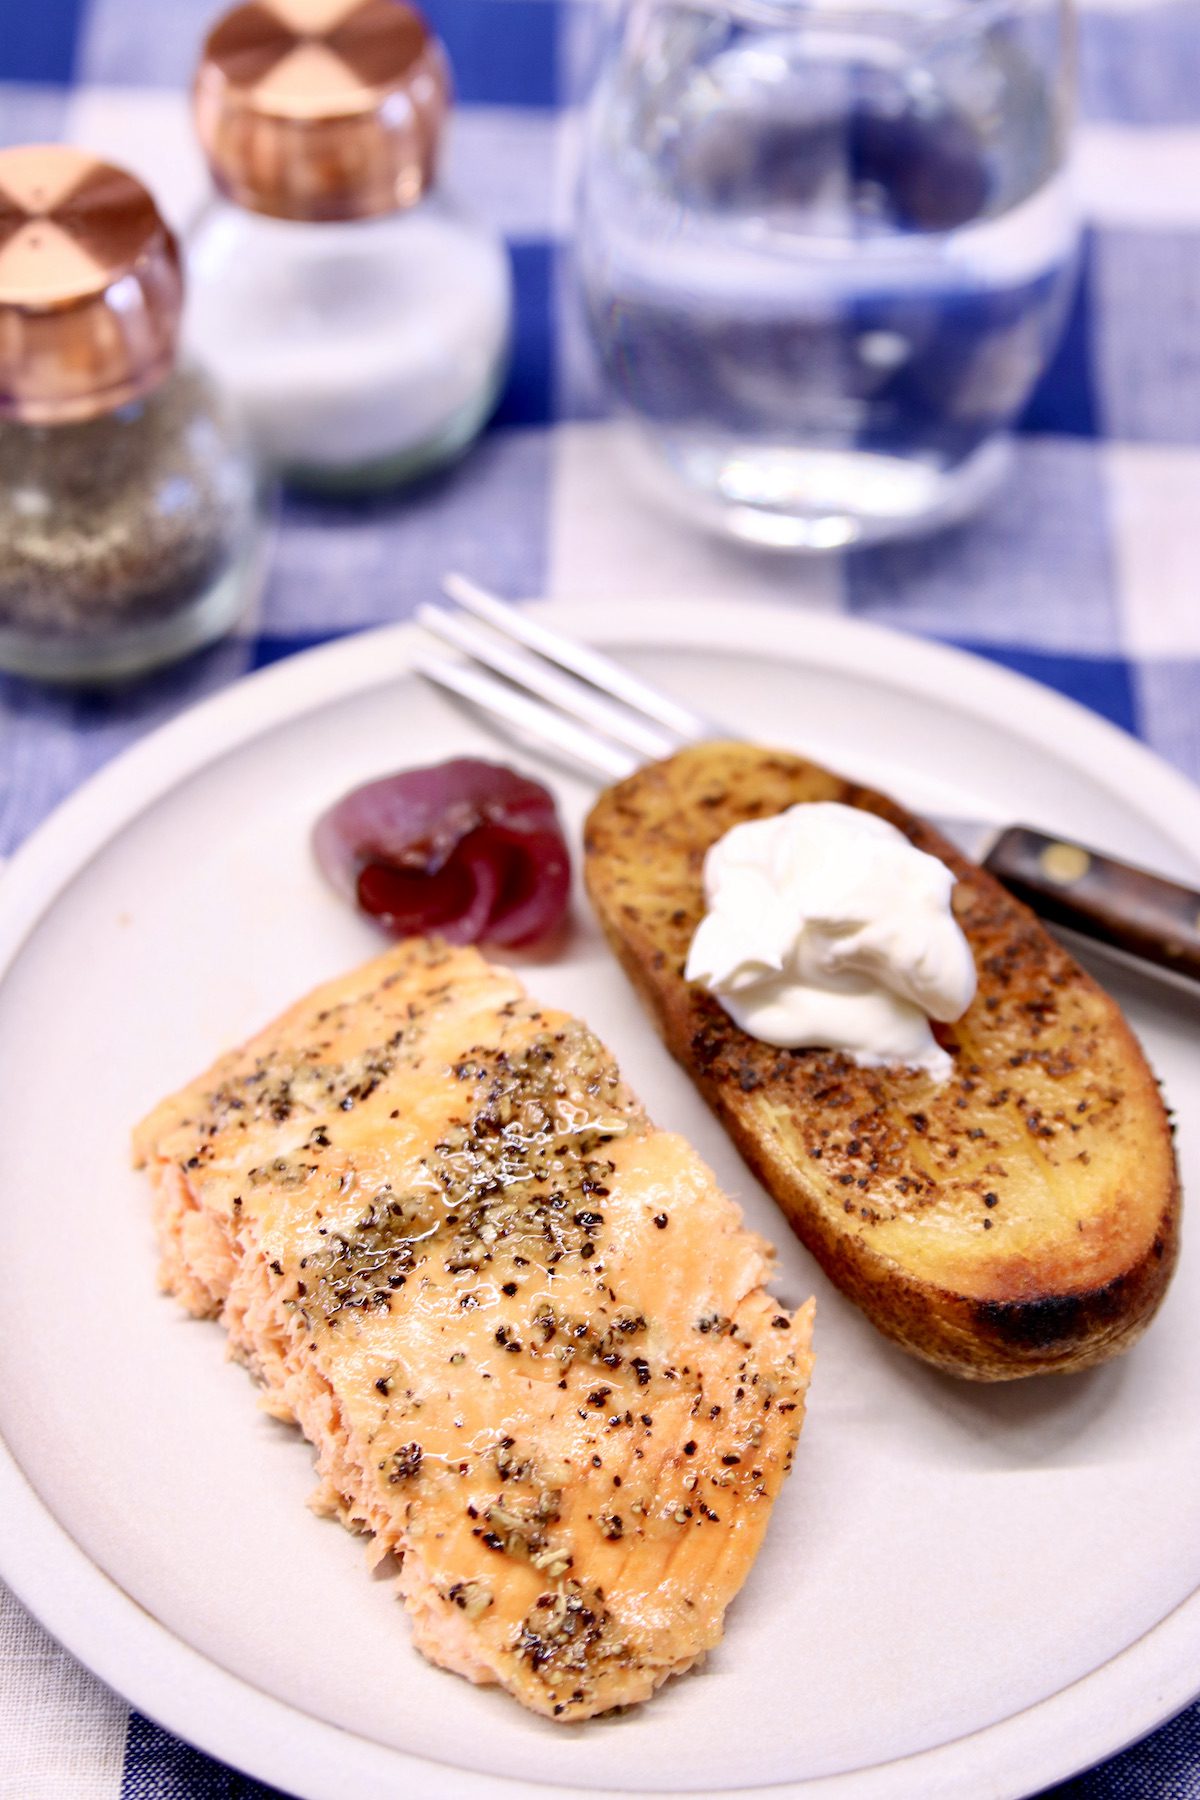 grilled salmon fillet on a plate with ½ of a baked potato with sour cream.